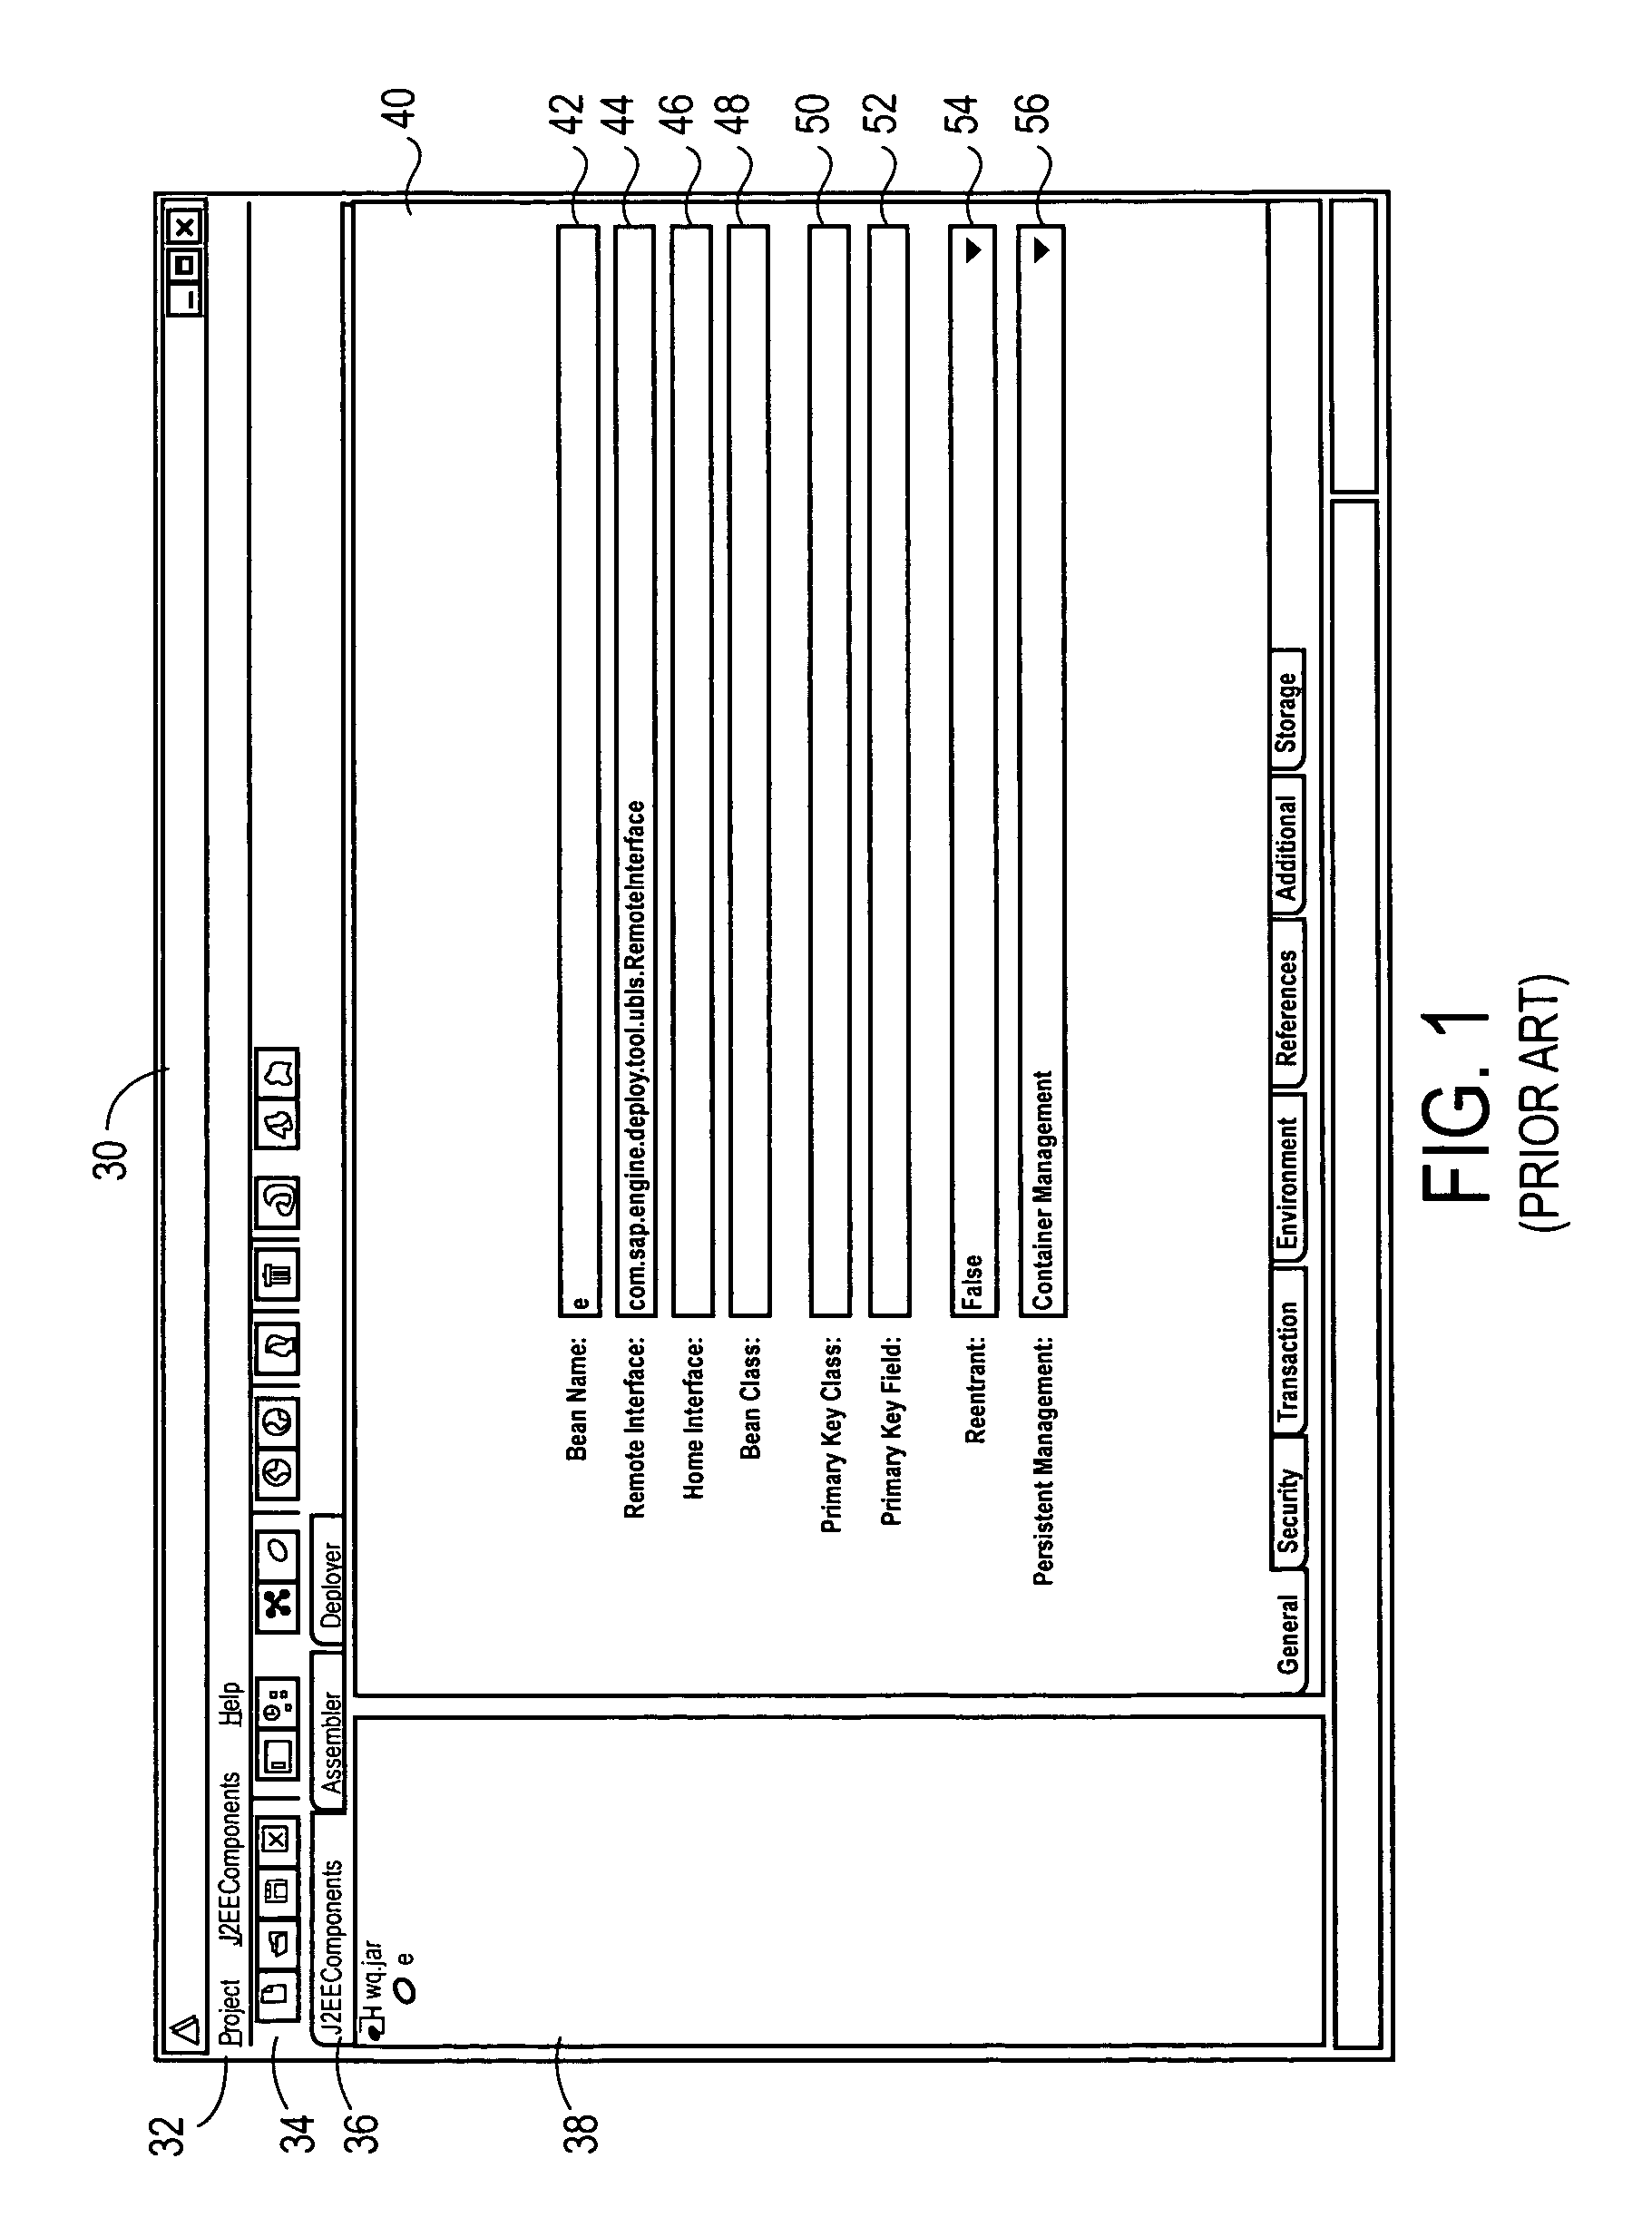 Graphical user interface with an error reporting system